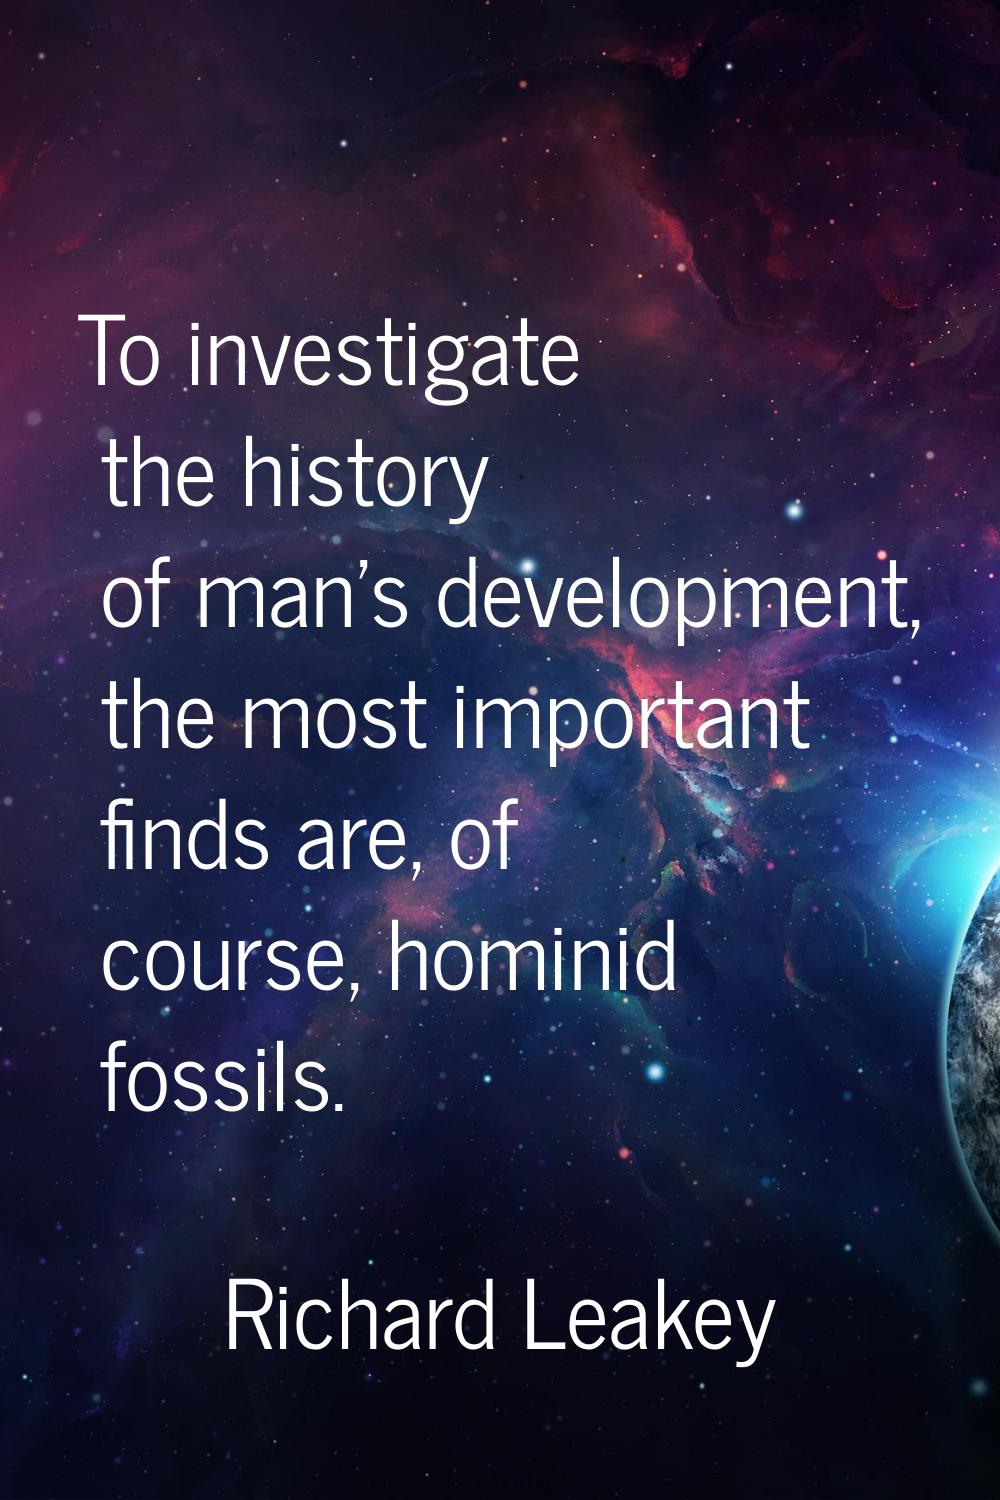 To investigate the history of man's development, the most important finds are, of course, hominid f